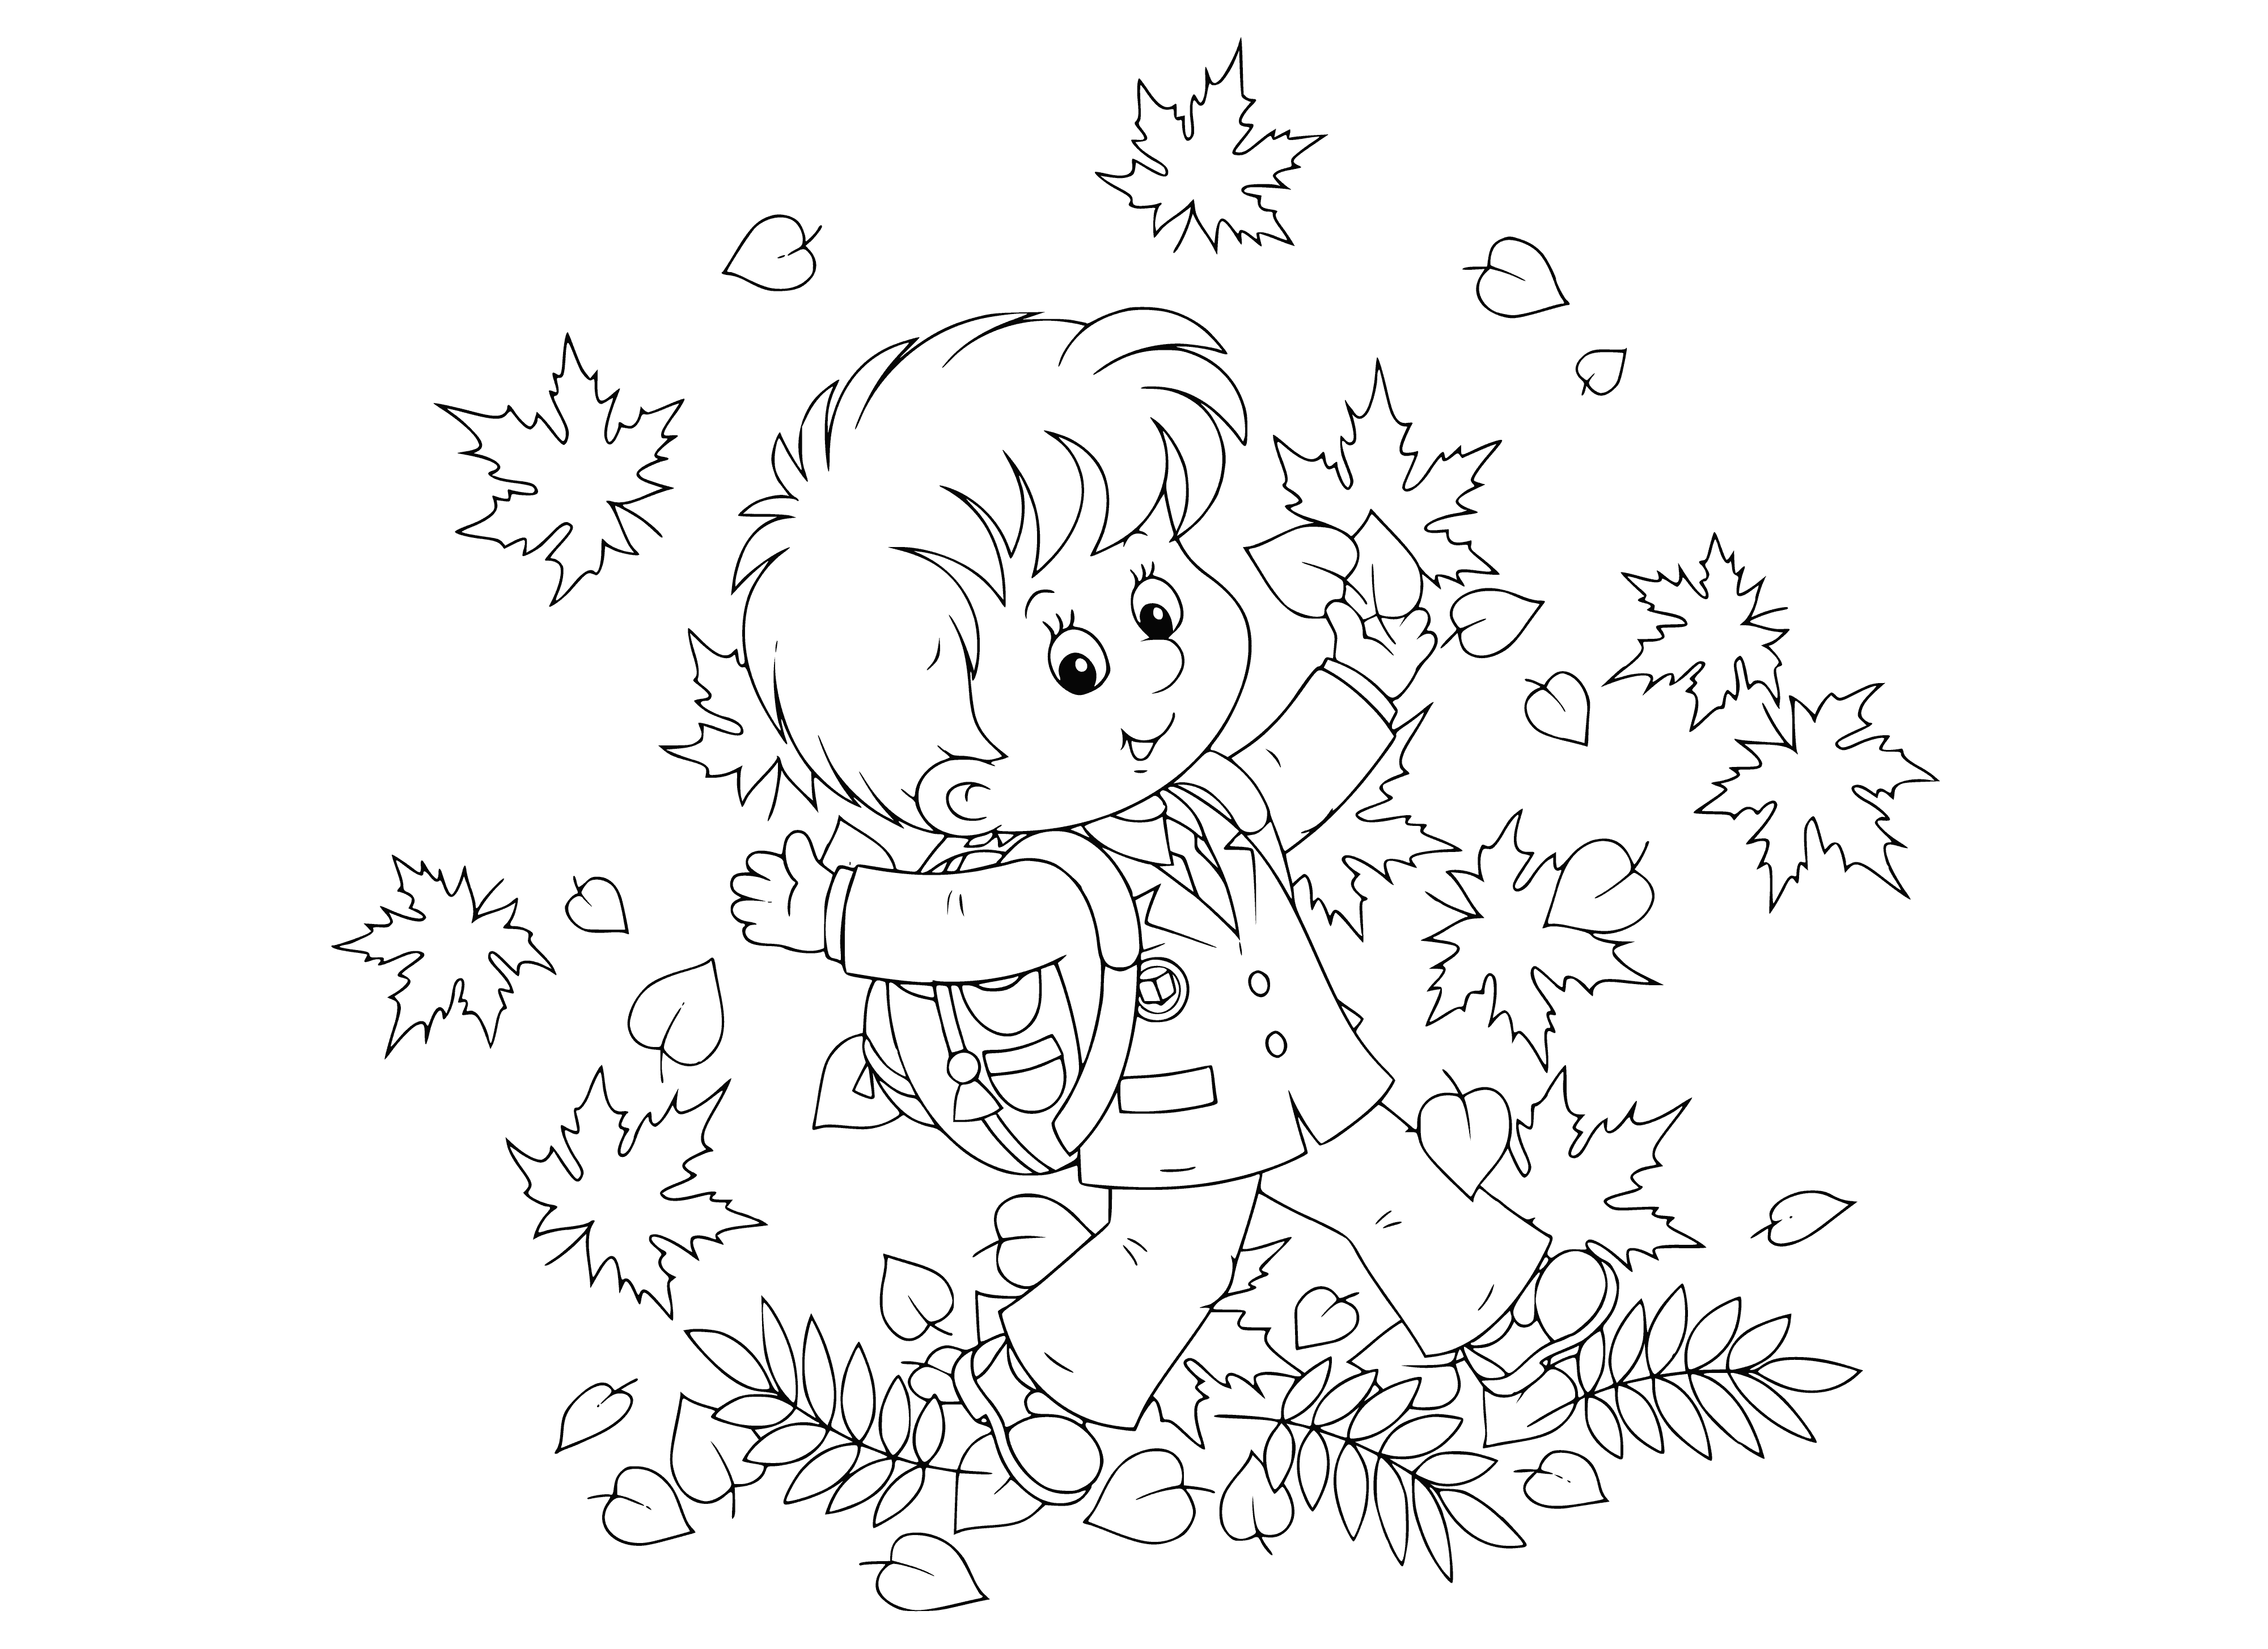 coloring page: Girl at a desk writing in book, wearing backpack and surrounded by school supplies.